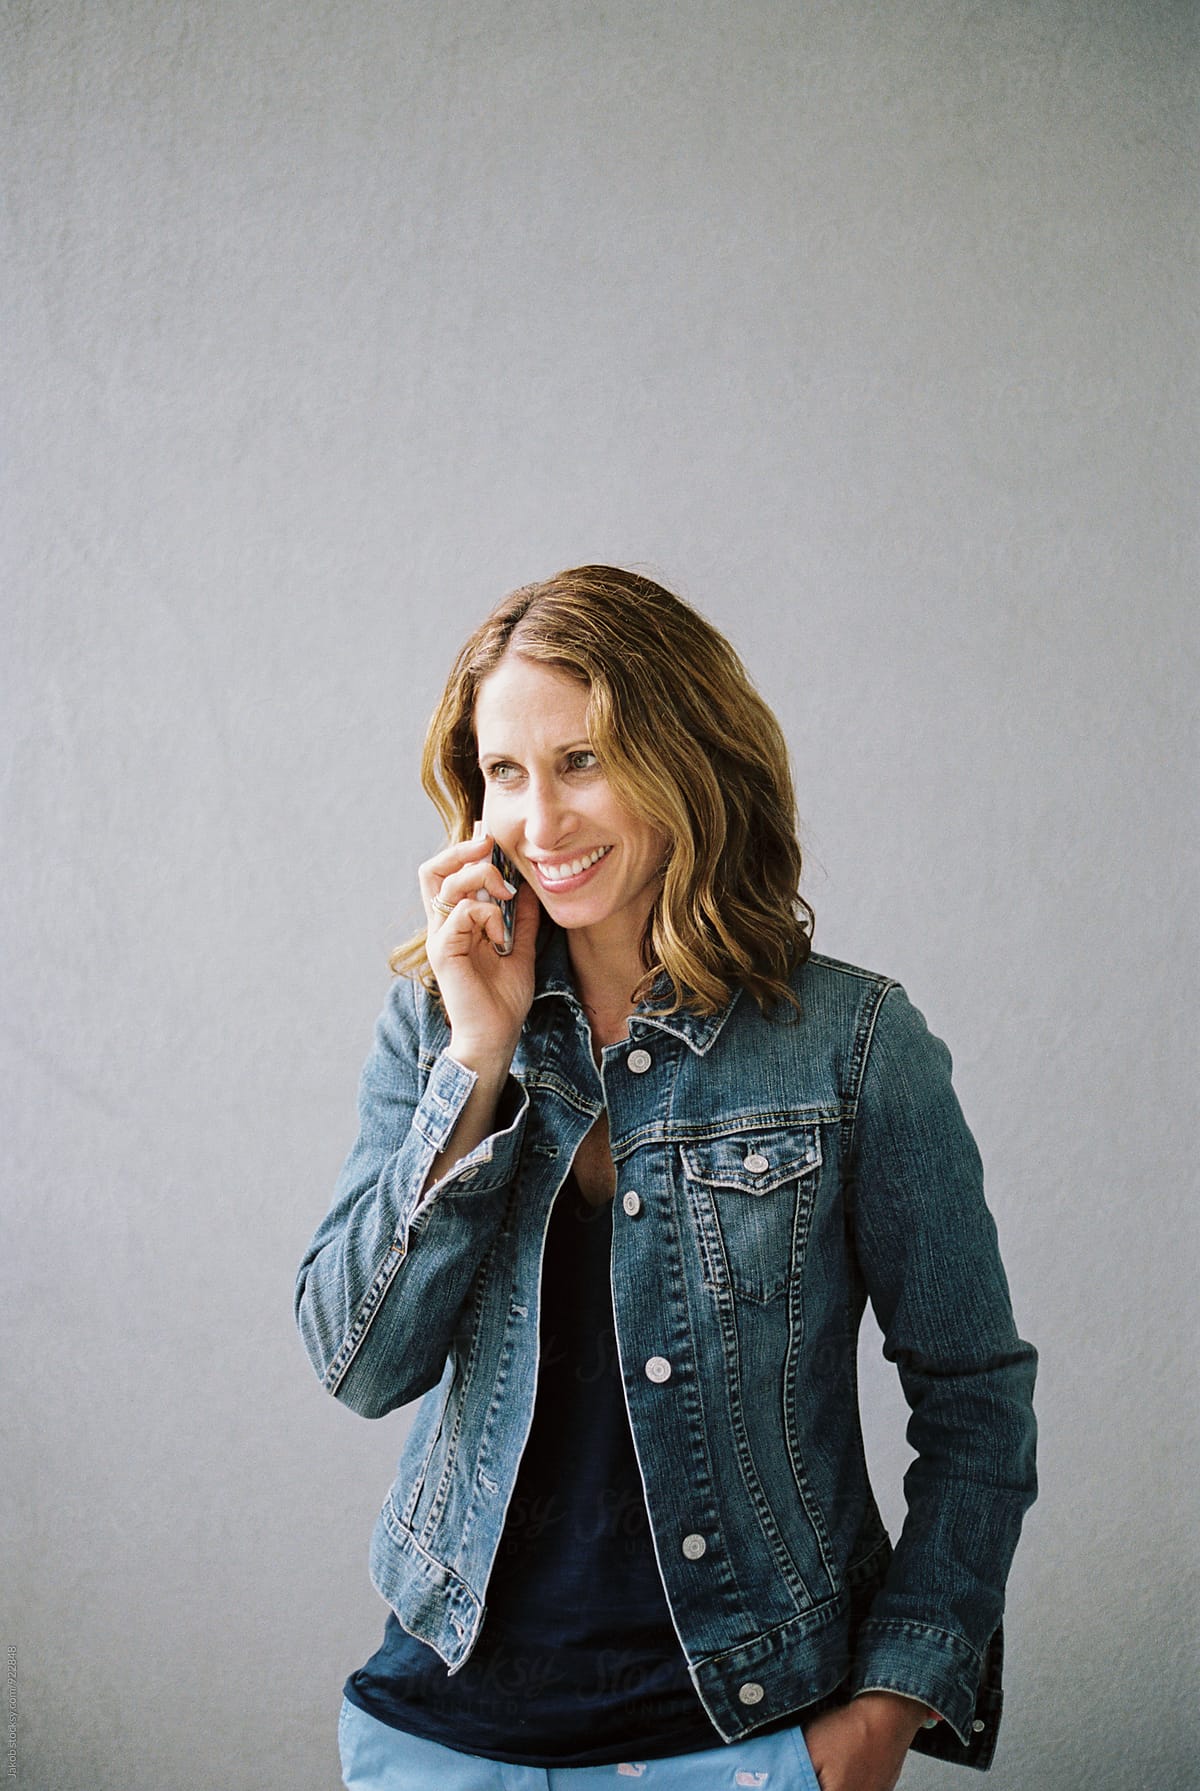 Attractive woman in a denim jacket smiling and talking on the phone